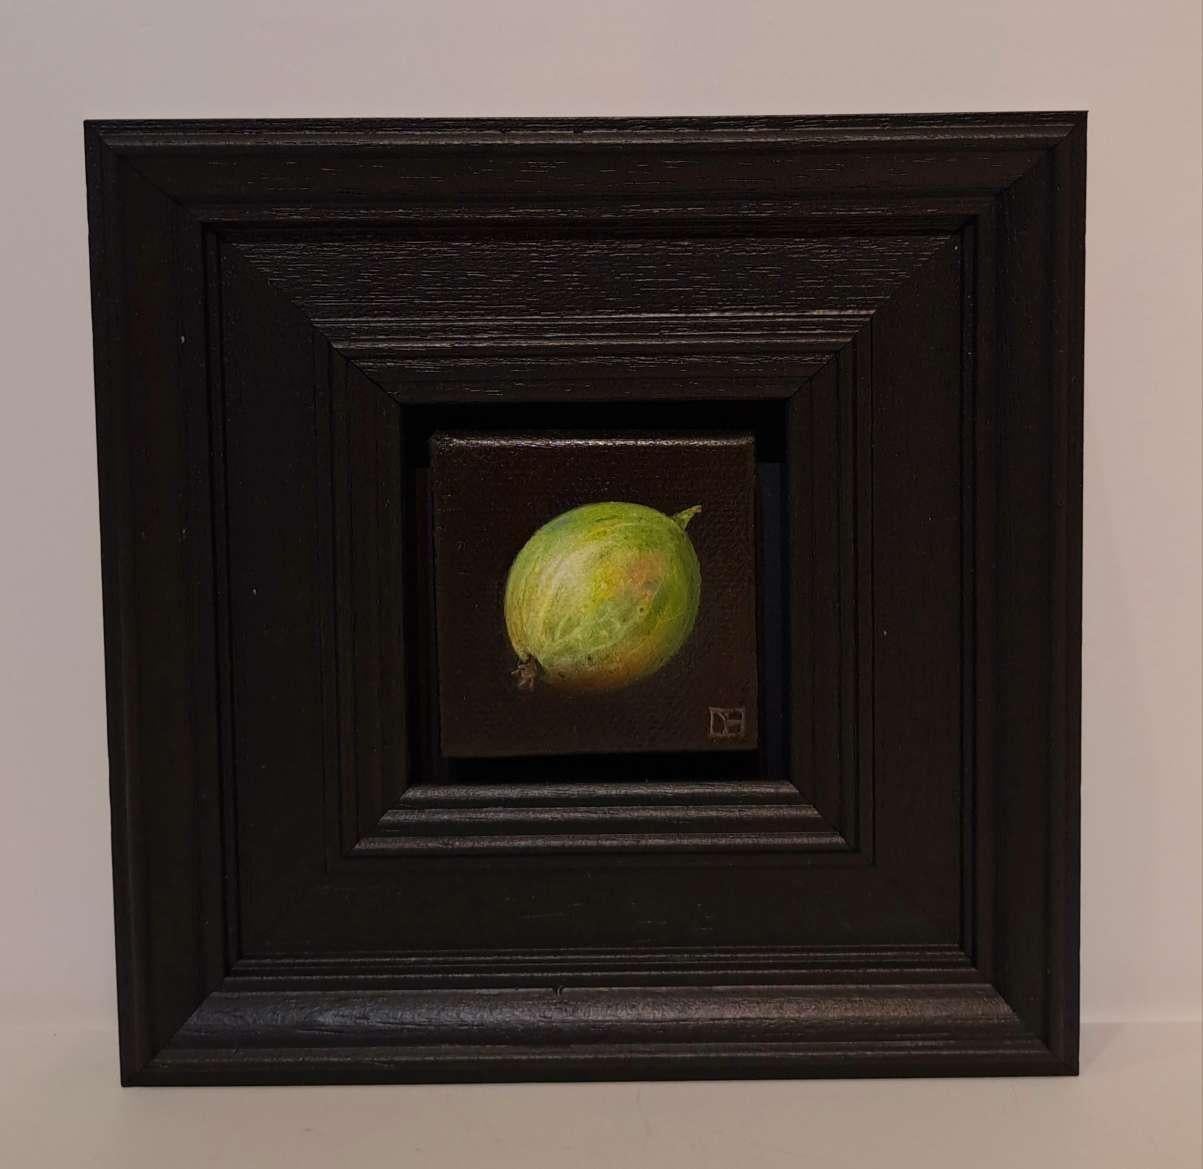 Pocket Green Gooseberry is an original oil painting by Dani Humberstone as part of her Pocket Painting series featuring small scale realistic oil paintings, with a nod to baroque still life painting. The paintings are set in a black wood layered